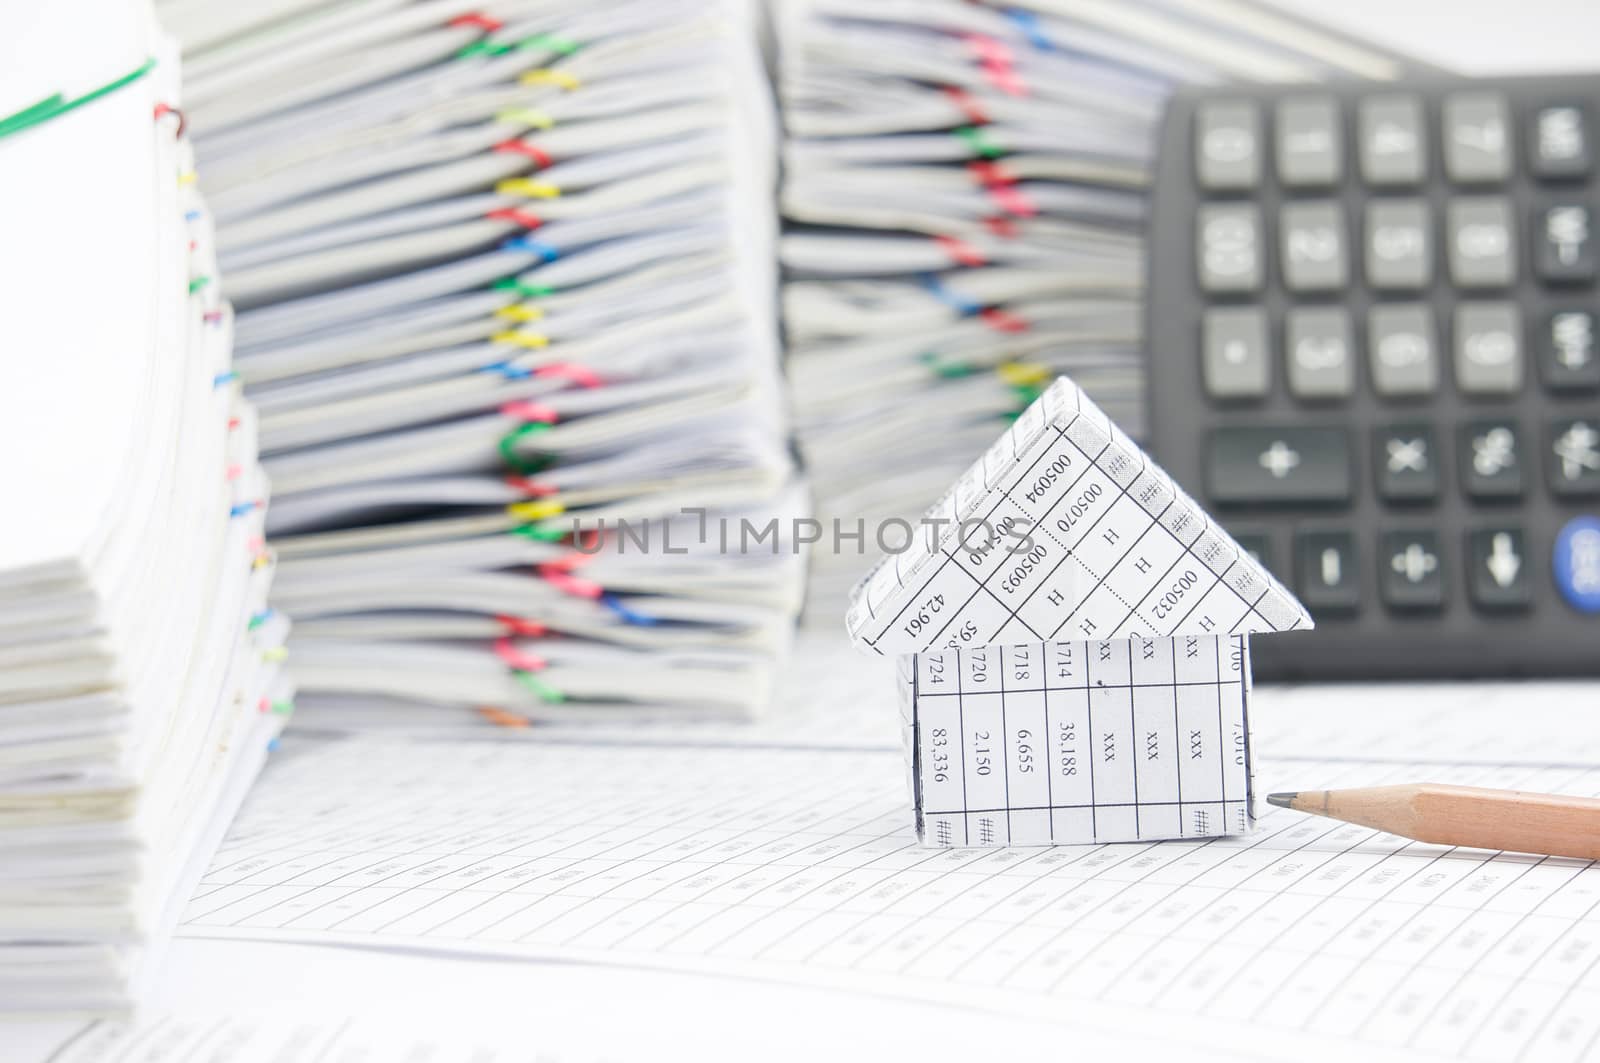 House and brown pencil on finance account have blur calculator and pile of paperwork as foreground and background.